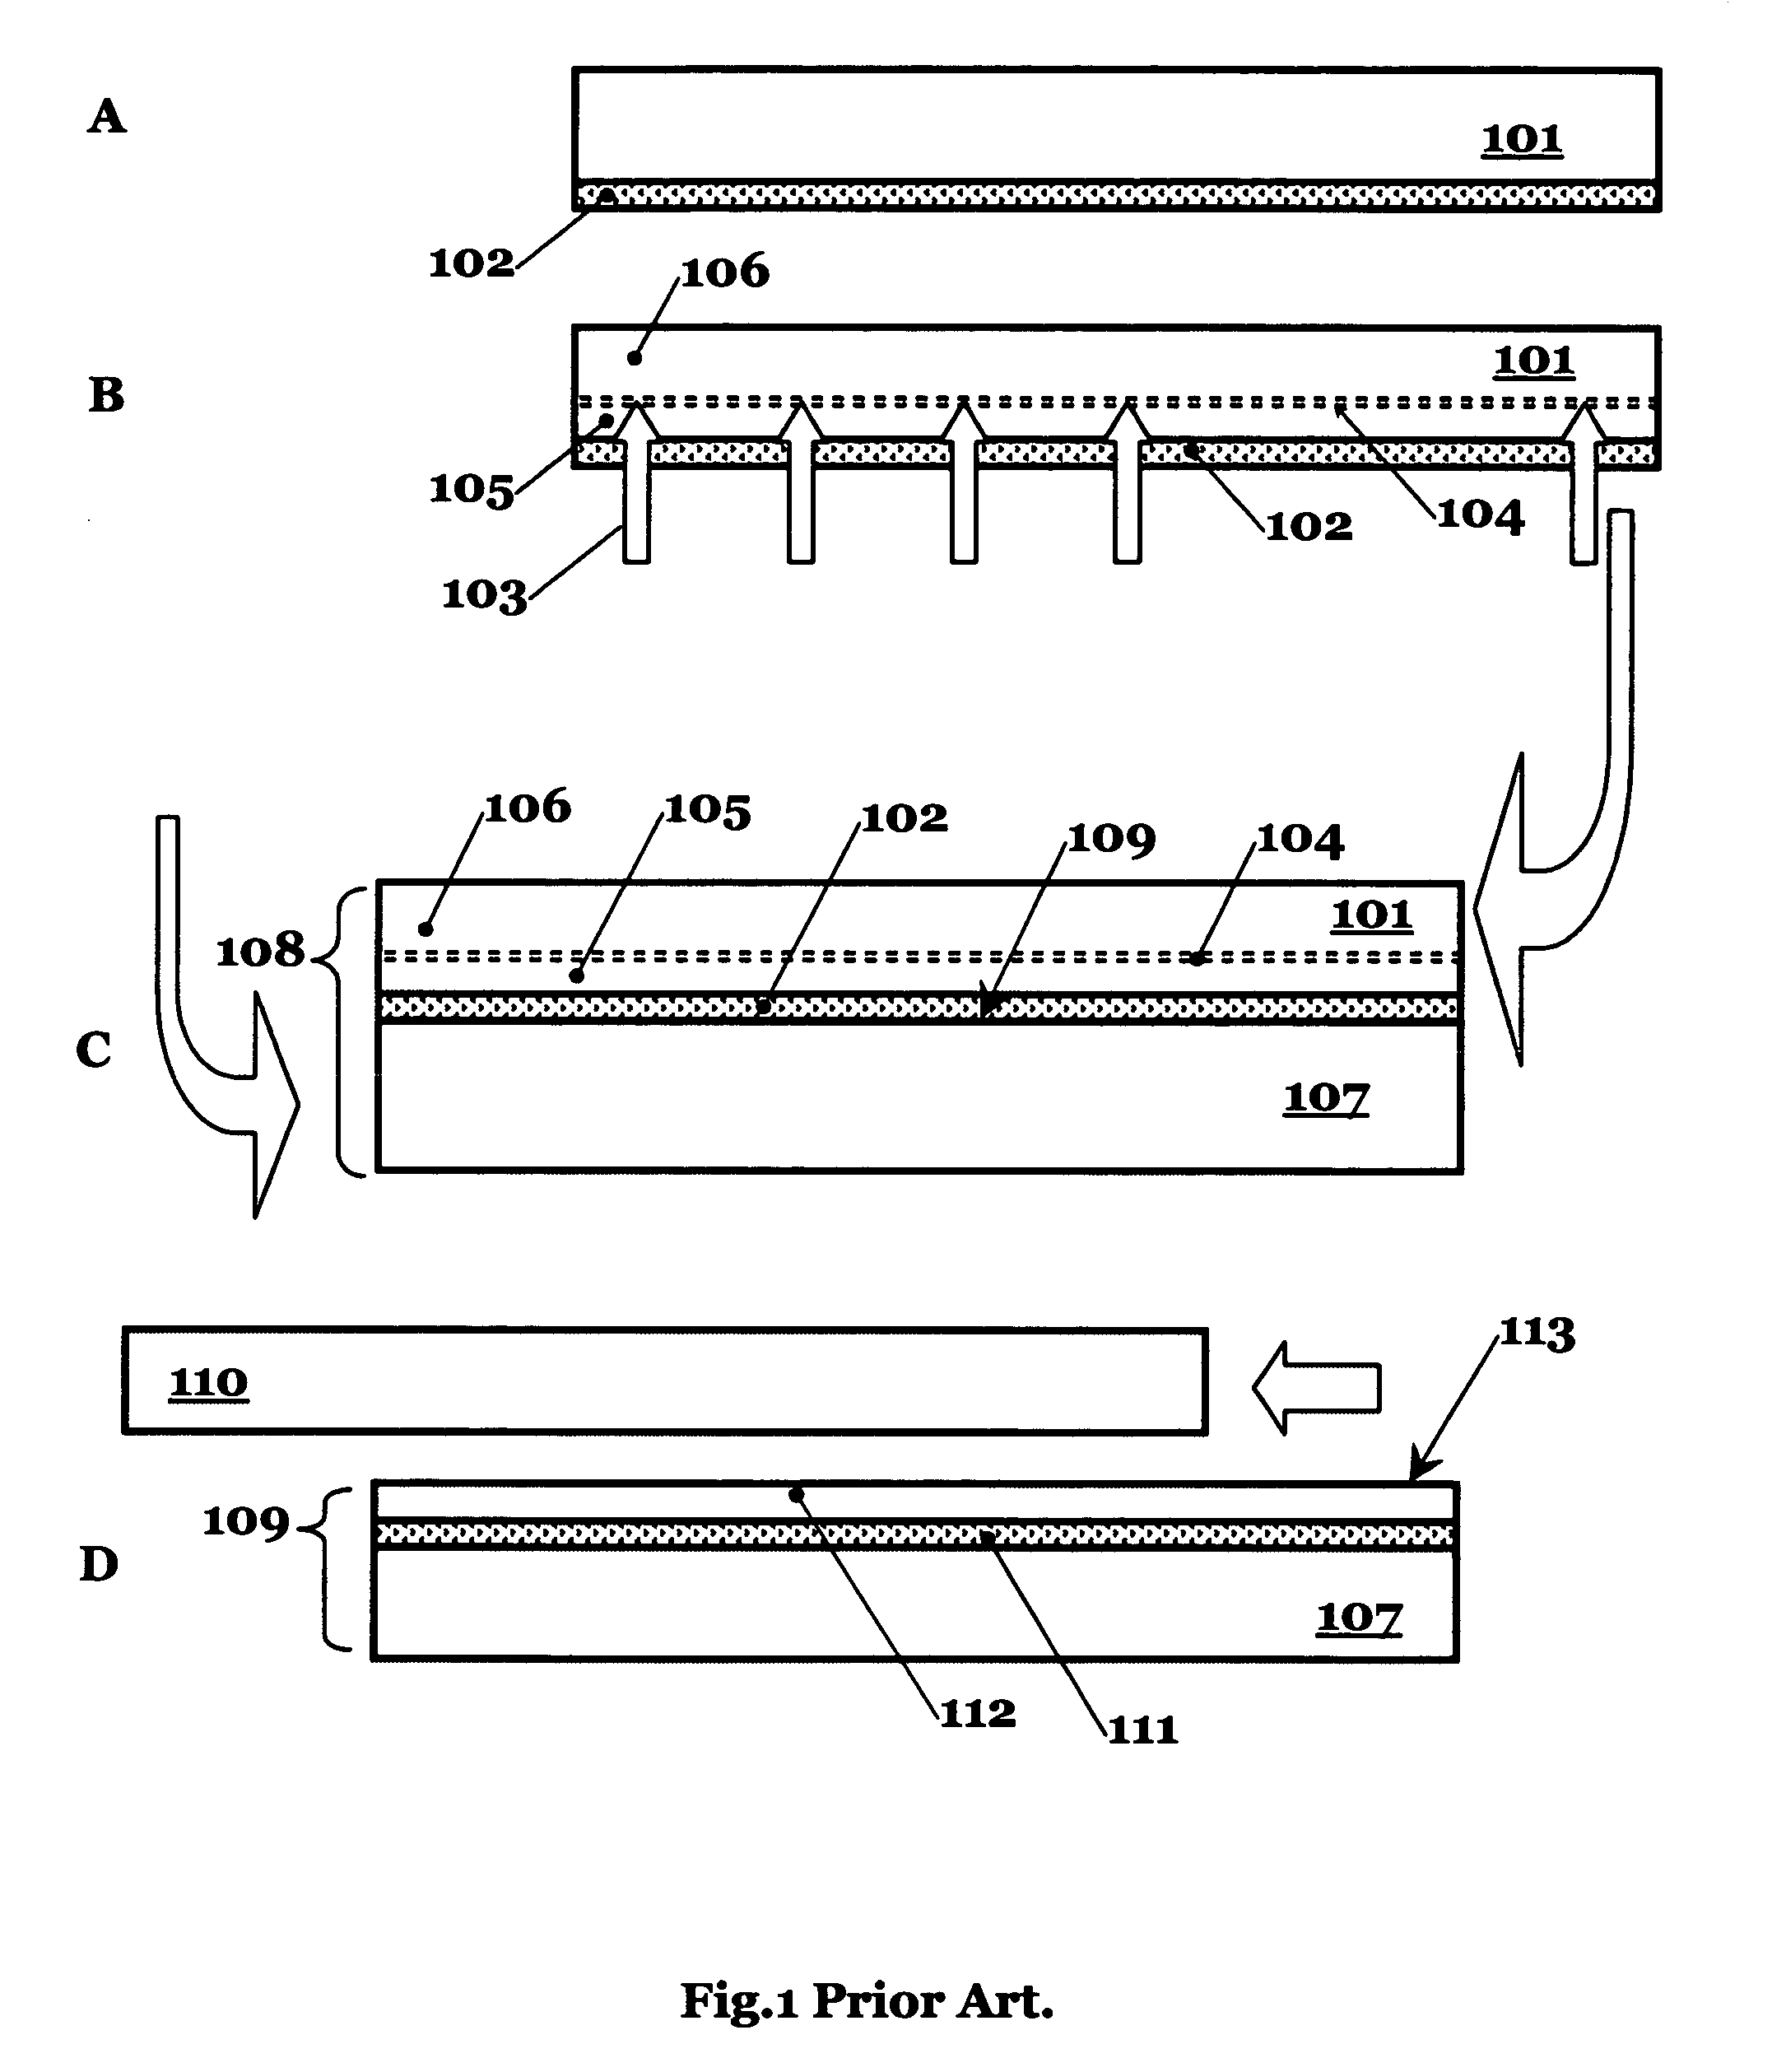 Method for forming a fragile layer inside of a single crystalline substrate preferably for making silicon-on-insulator wafers